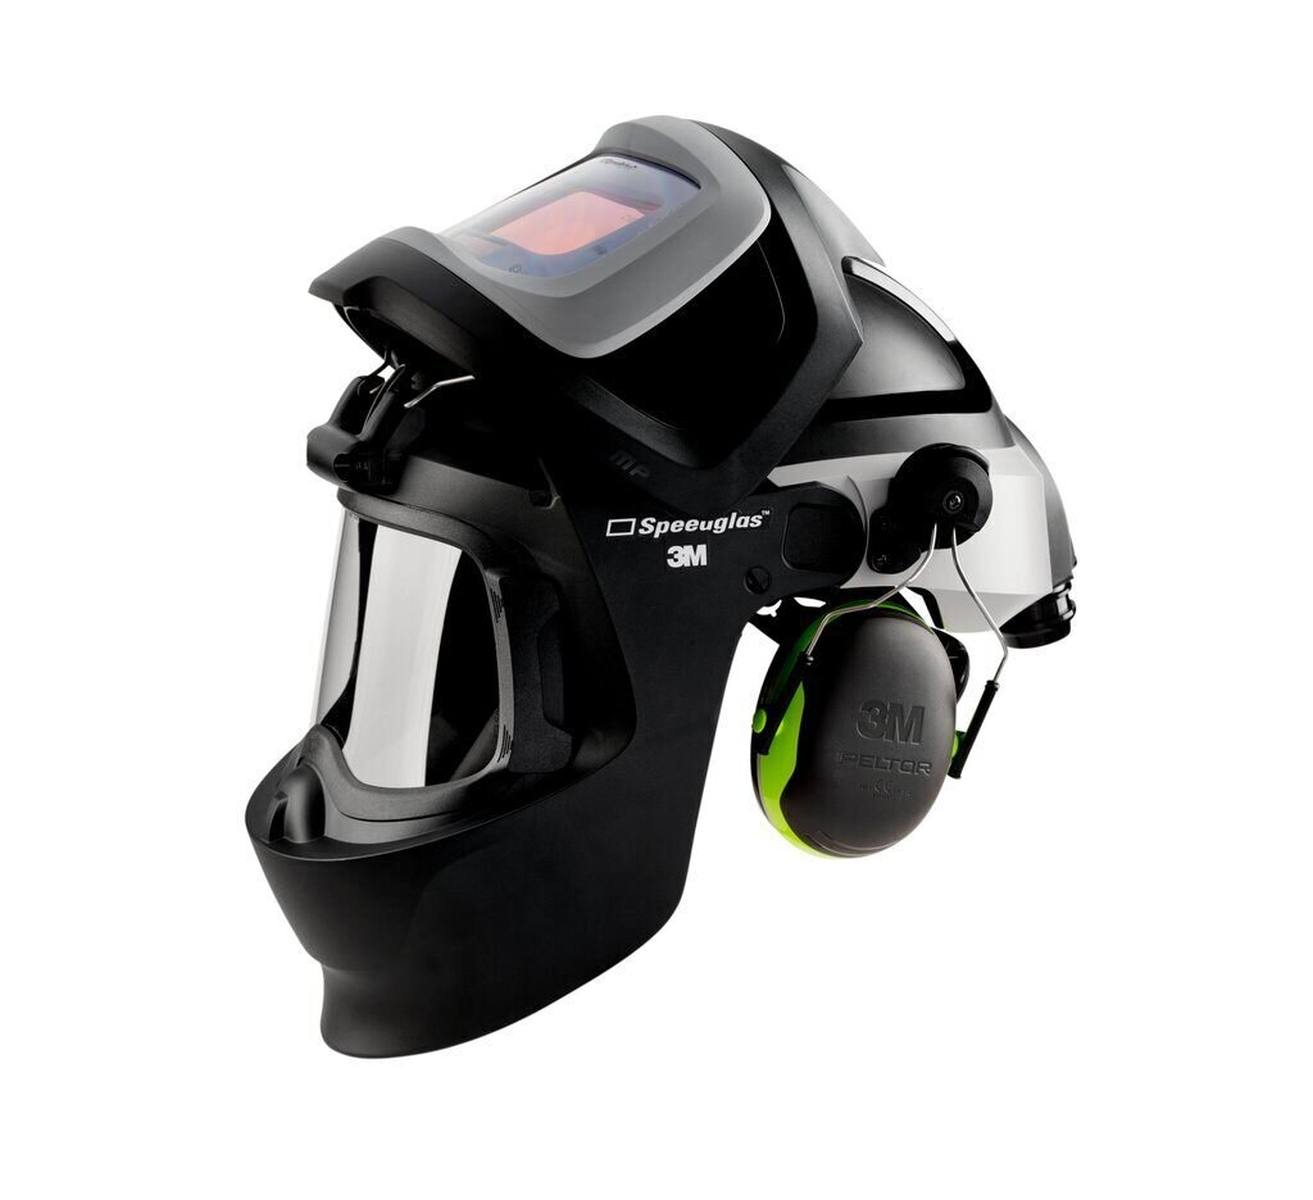 3M Speedglas 9100 MP welding mask, with 9100XX ADF, with Adflo blower respirator, QRS air hose, 5333506 adapter, air flow meter, pre-filter, spark arrester, particle filter, lithium-ion battery and charger incl. storage bag #577725